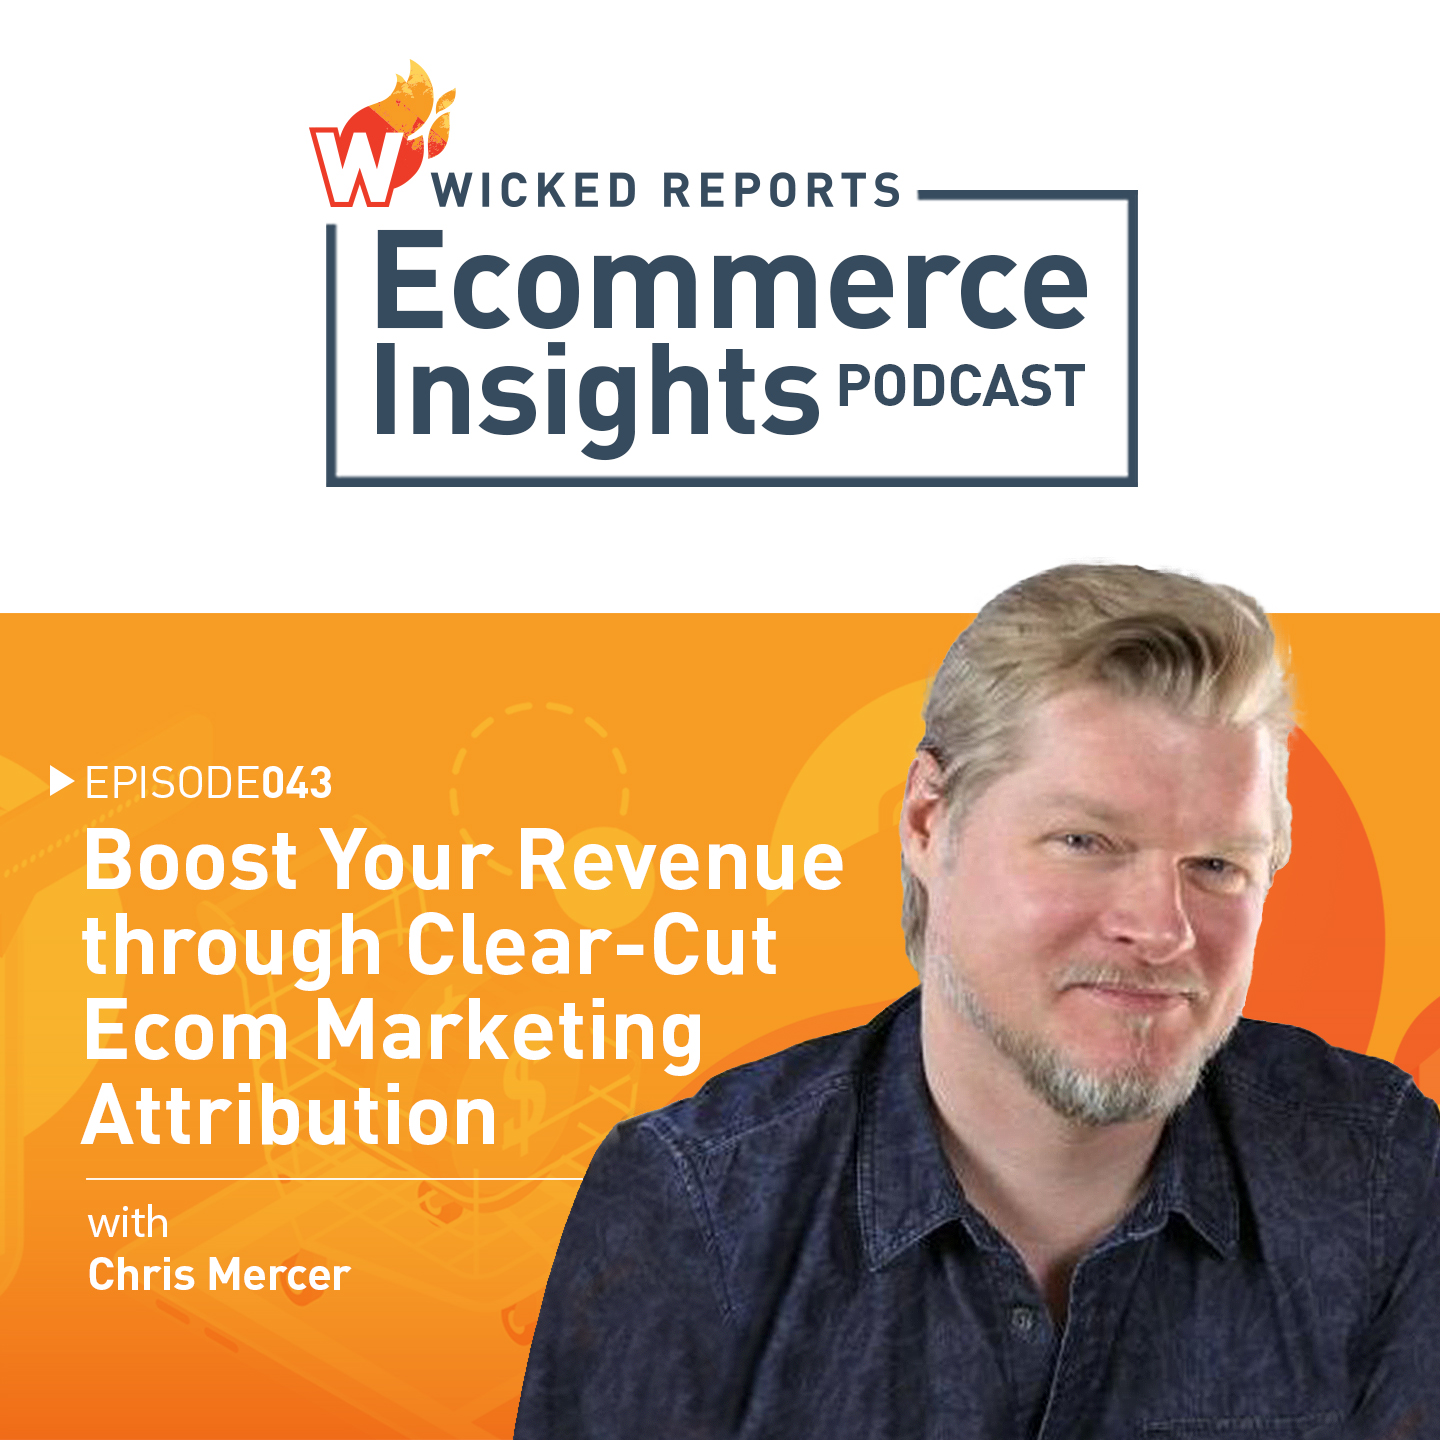 Boost Your Revenue through Clear-Cut Ecom Marketing Attribution with Chris Mercer